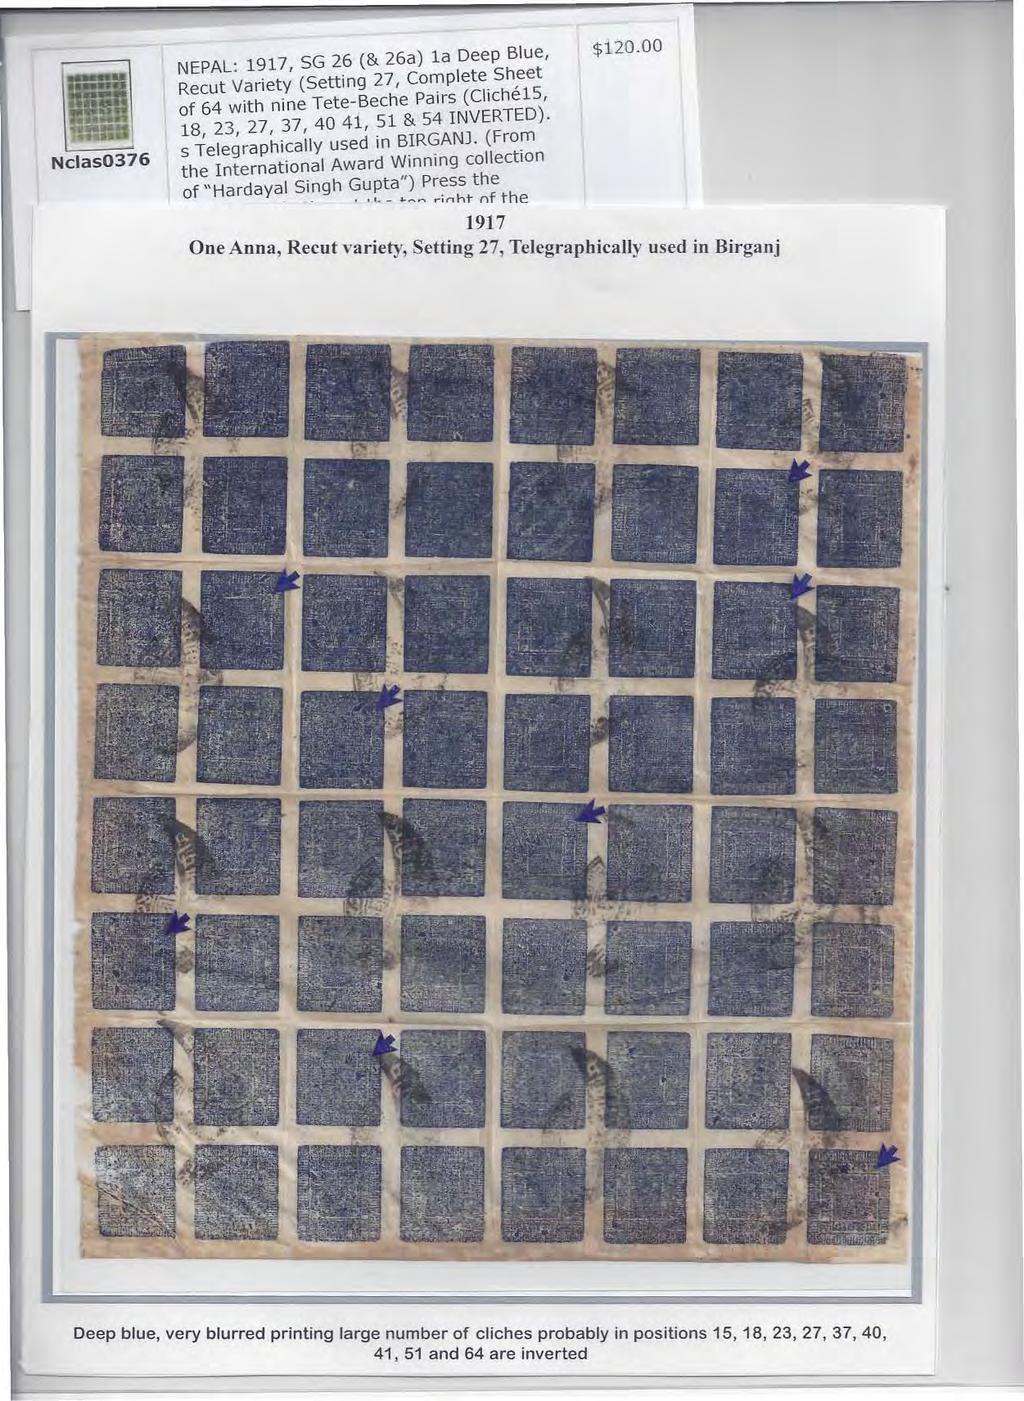 Nclas0376 $120.00 NEPAL: 1917, SG 26 (& 26a) 1a Deep Blue, Recut Variety (Setting 27, Complete. Sh,eet of 64 with nine Tete-Beche Pairs (CIIChe15), 18, 23, 27, 37,40 4i, 51 & 54 INVERTED.